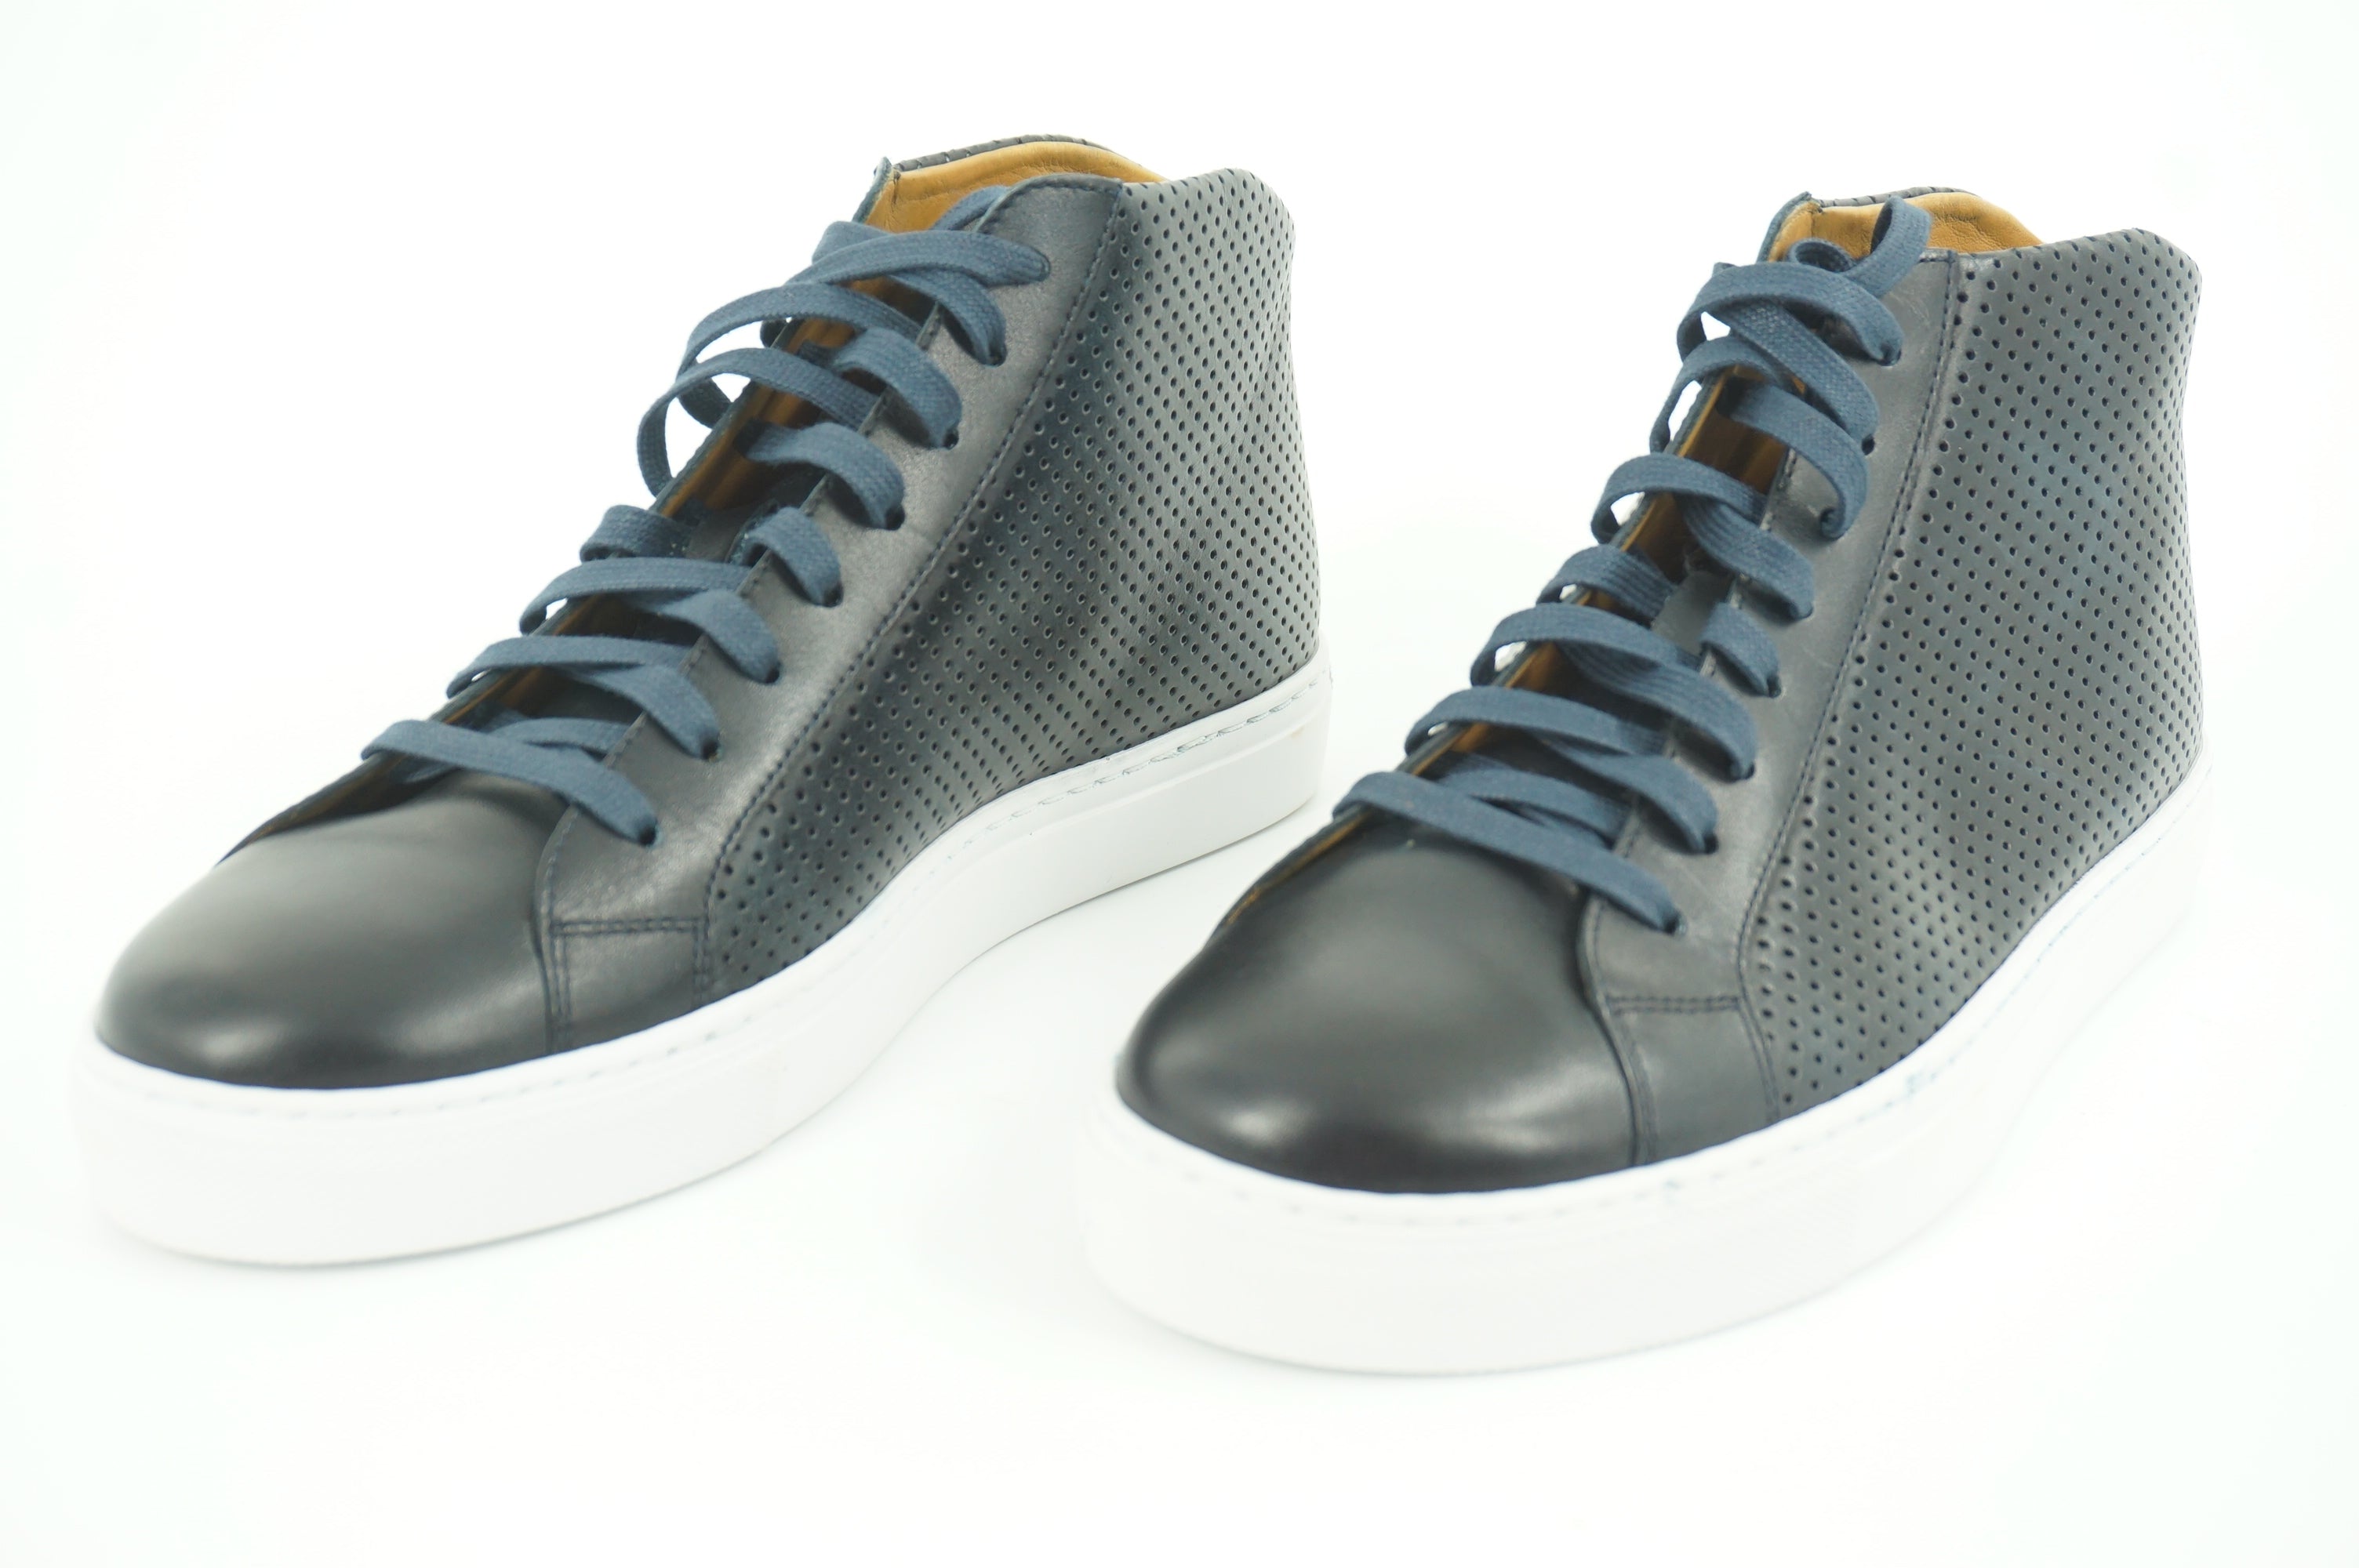 Magnanni Mack Blue Perforate Leather Lace Up D Sneaker SZ 9.5 NIB $335 High Top